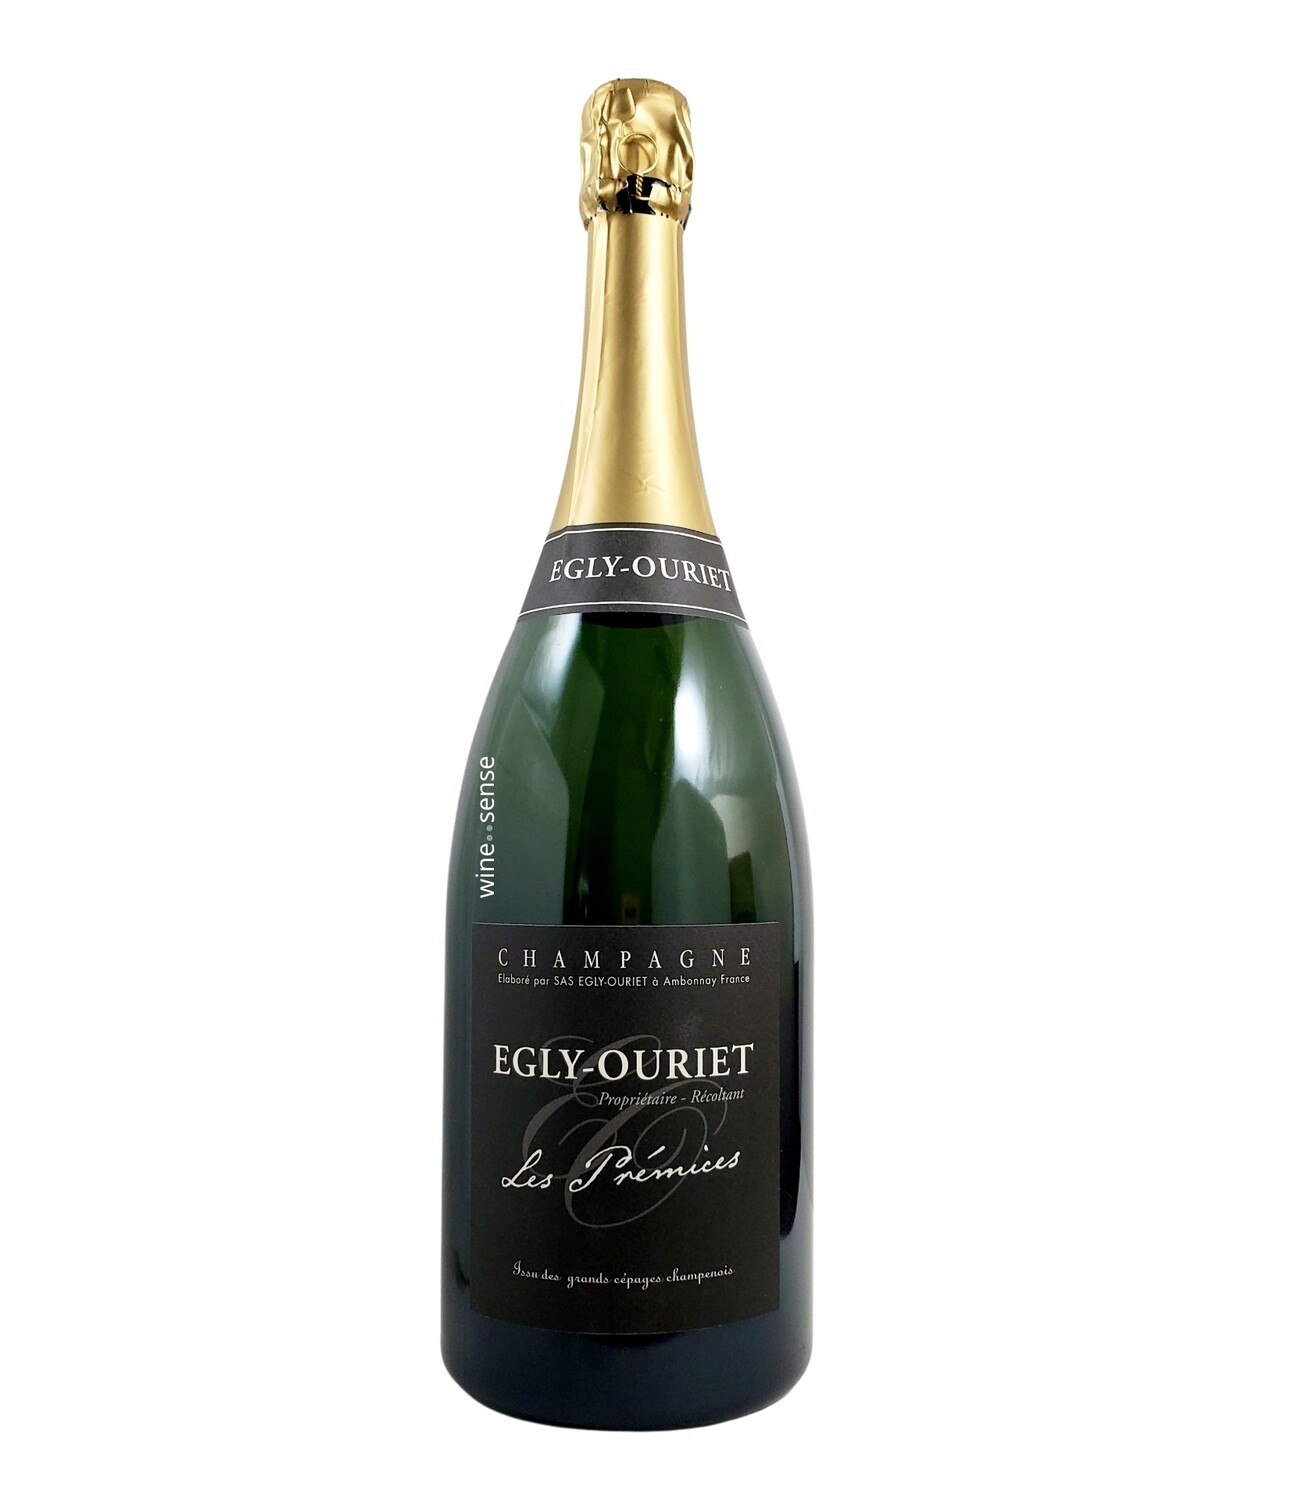 Egly-Ouriet, Champagne Brut Les Premices, MGN - (NV)